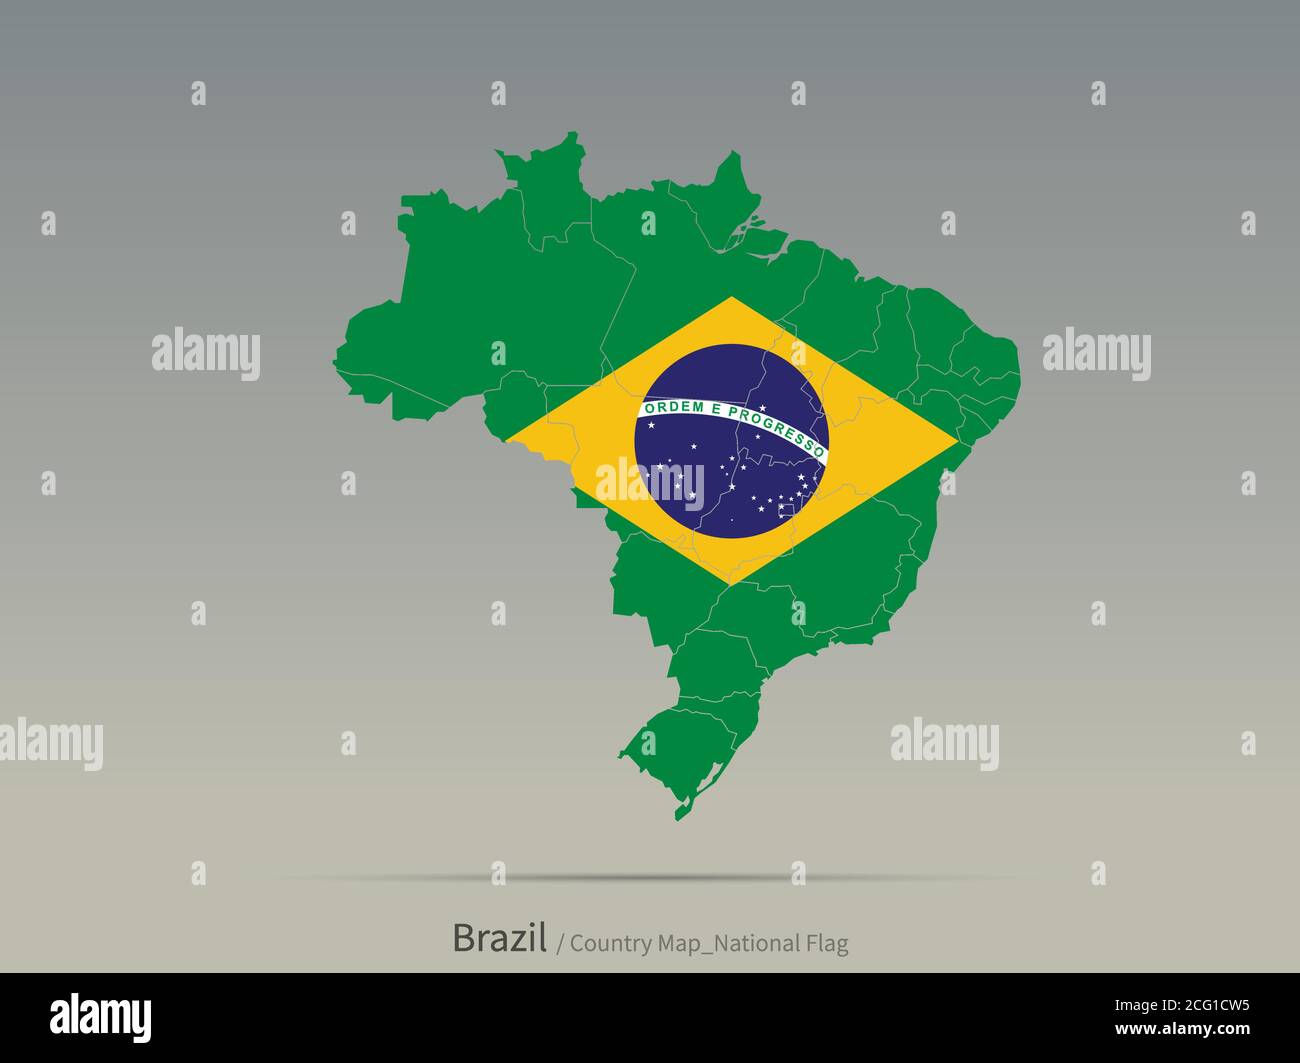 Brazil Flag Isolated on Map. South american countries map and flag. Stock Vector